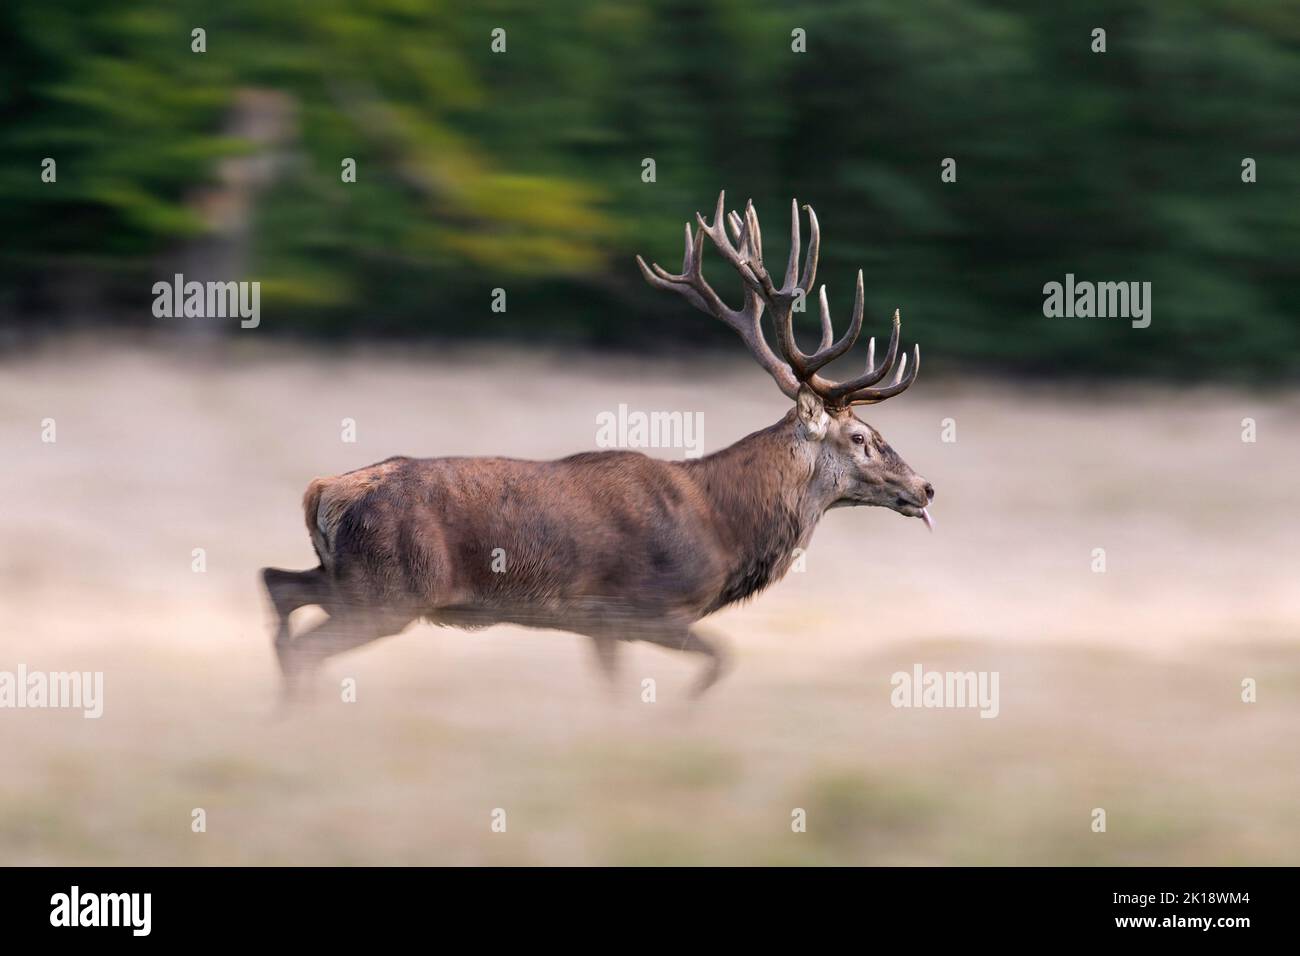 Red deer (Cervus elaphus) stag running in grassland at forest edge during the rut in autumn / fall Stock Photo